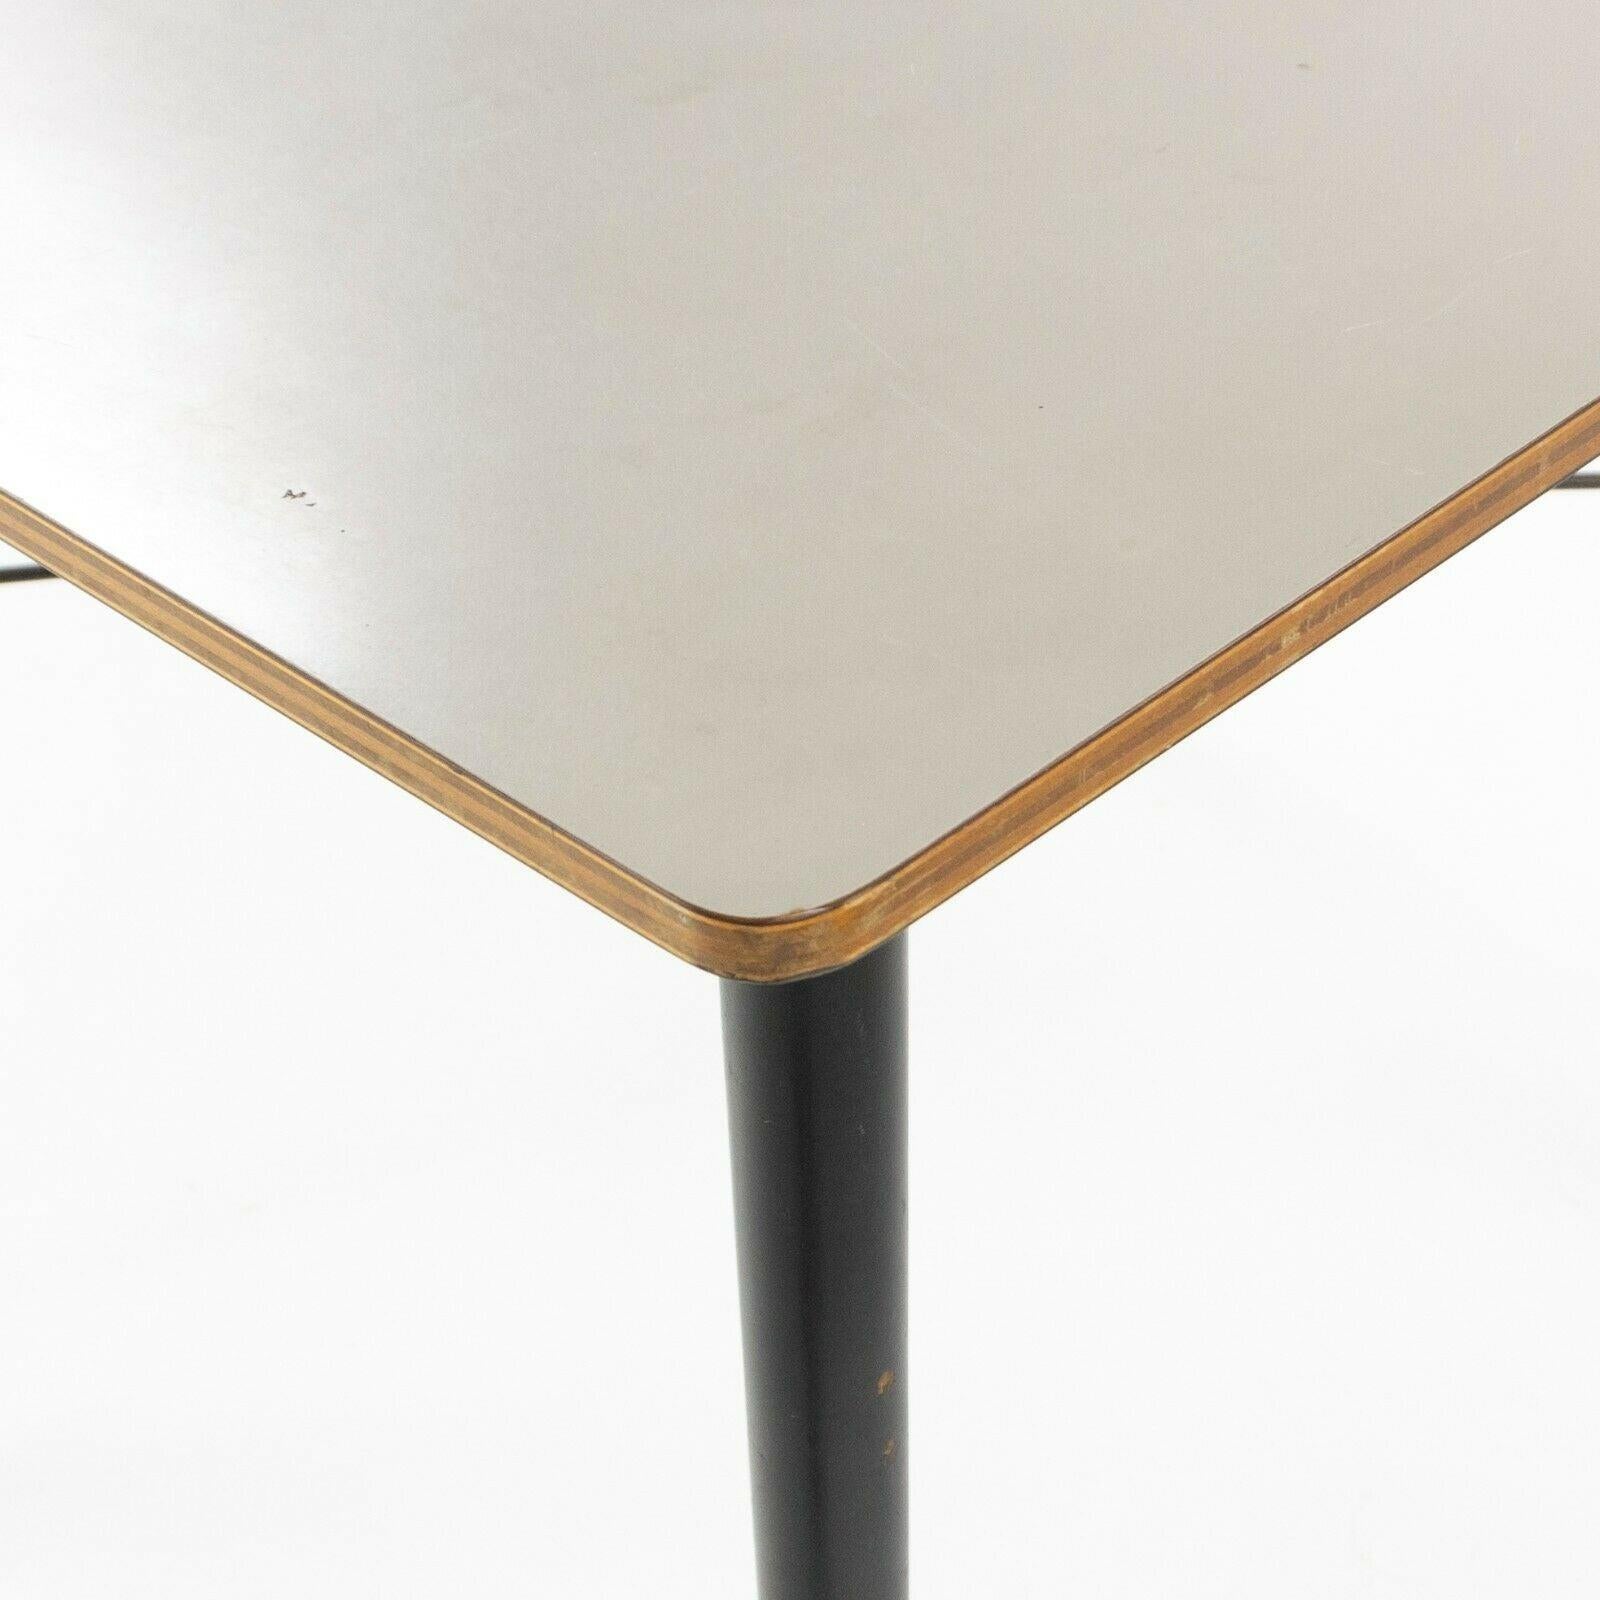 1954 Eames Herman Miller DTW 4 Dining Table White Laminate Top & Cross Brace For Sale 1